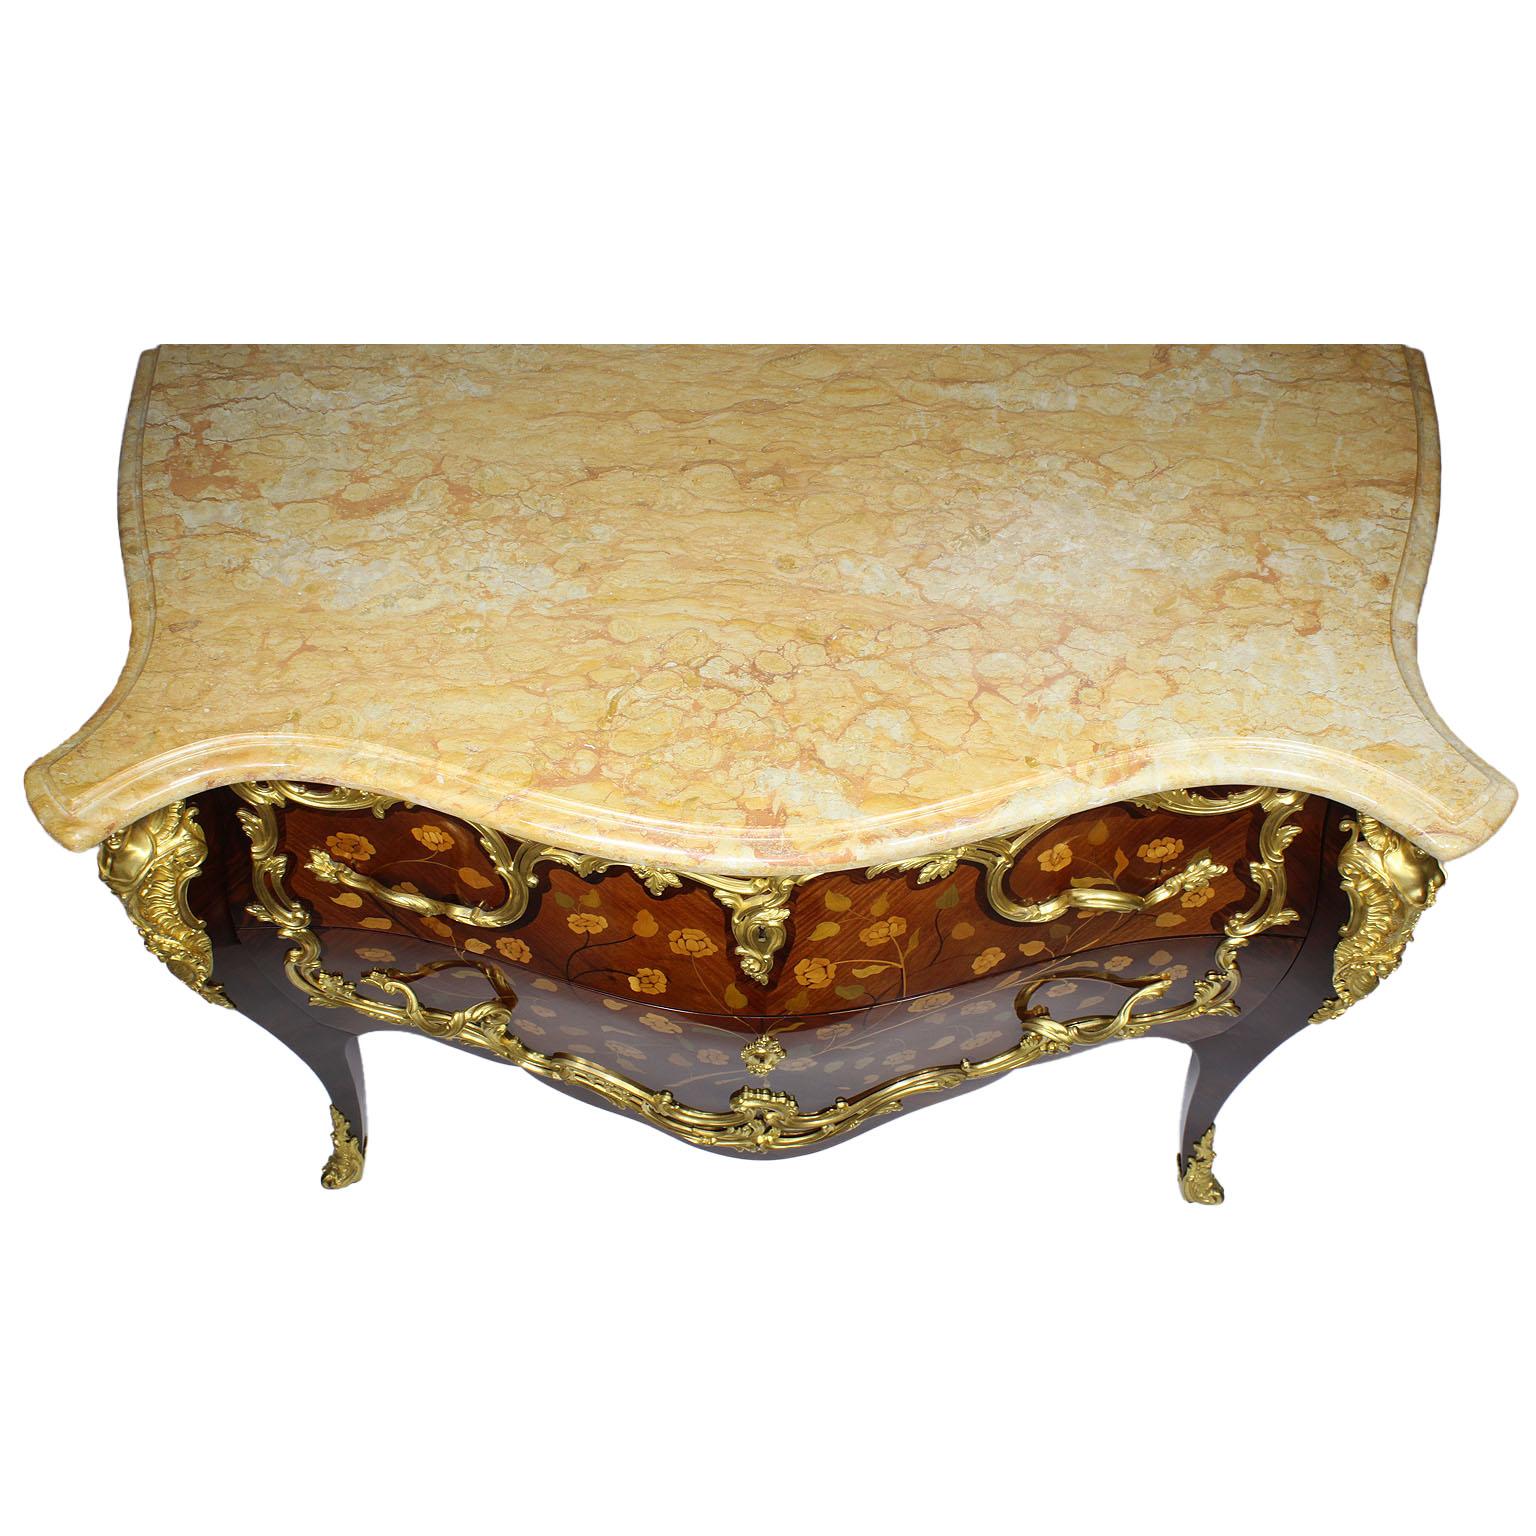 French 19th Century Louis XV Style Gilt Bronze-Mounted Marquetry Commodes, Pair For Sale 15